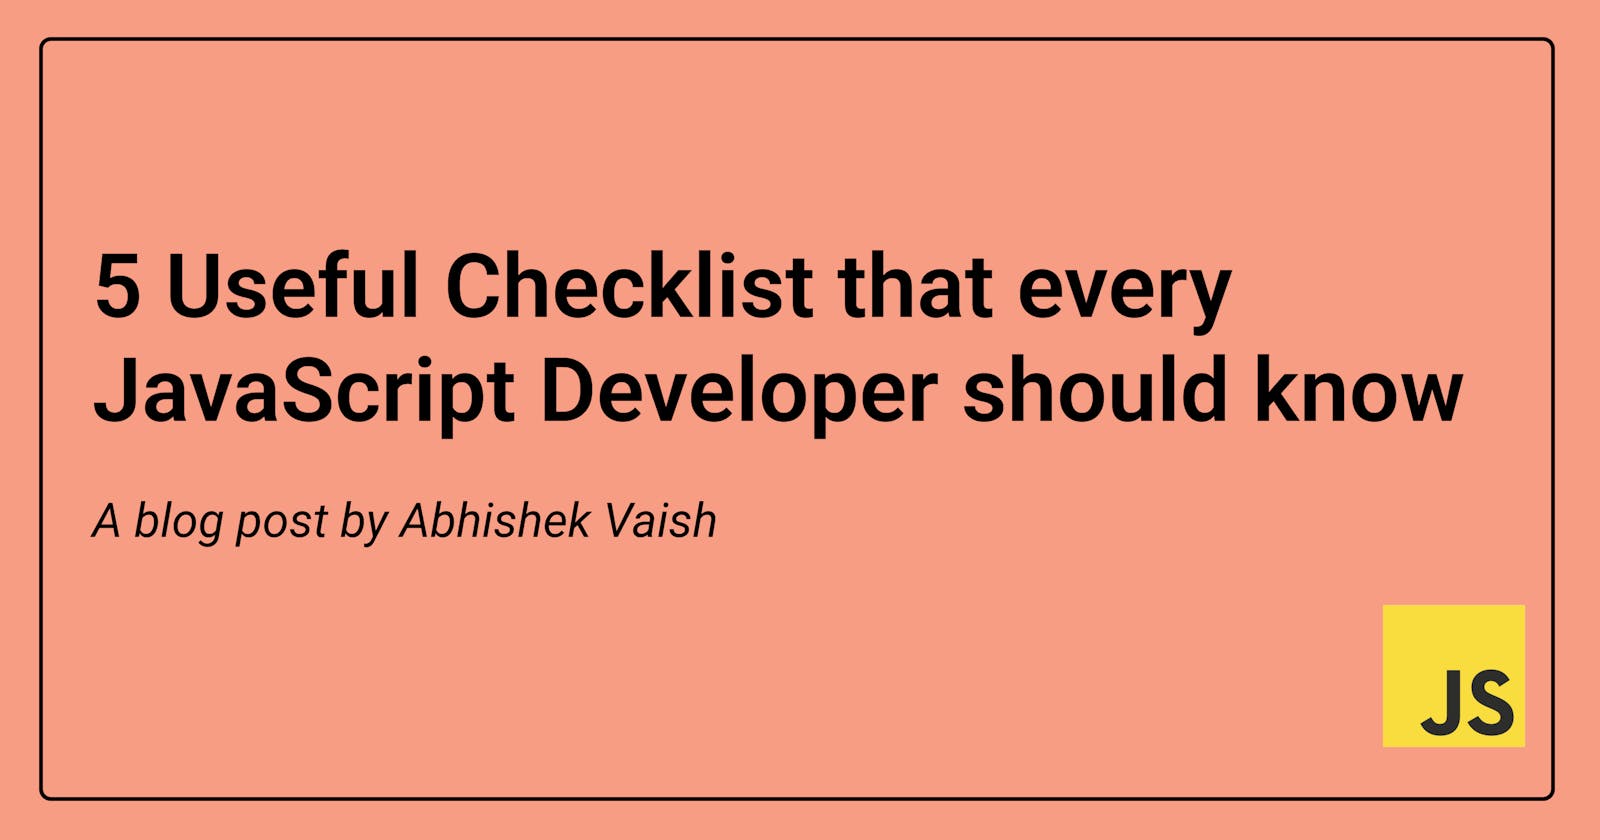 5 Useful Checklist that every JavaScript Developer should know